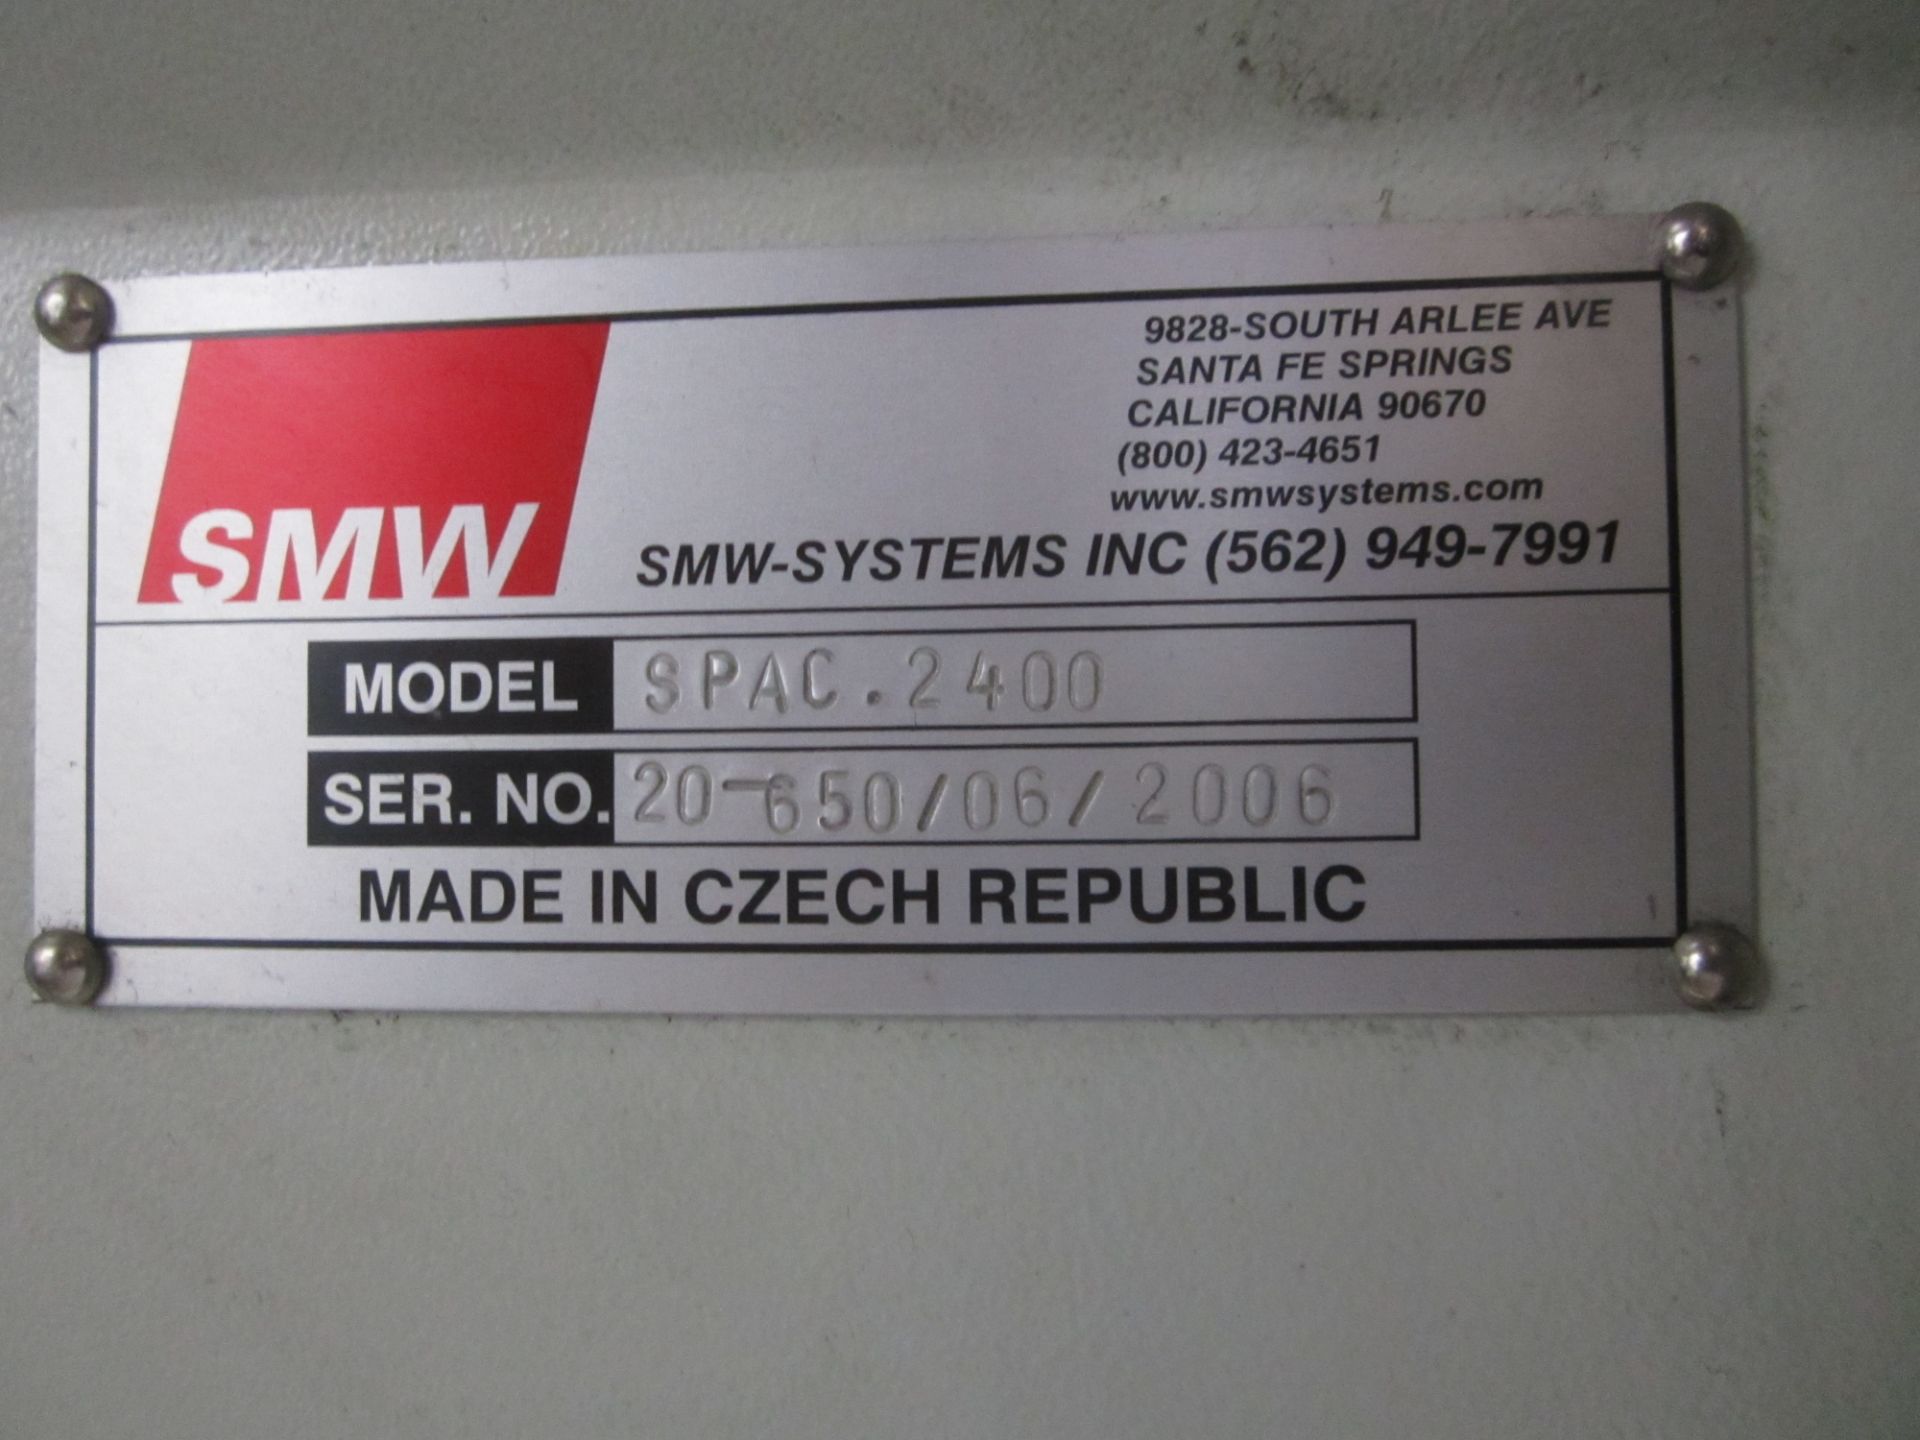 SMW Spacesaver 2400 CNC Bar Feed, s/n 20-650/06/2006, New 2006 - Image 5 of 5